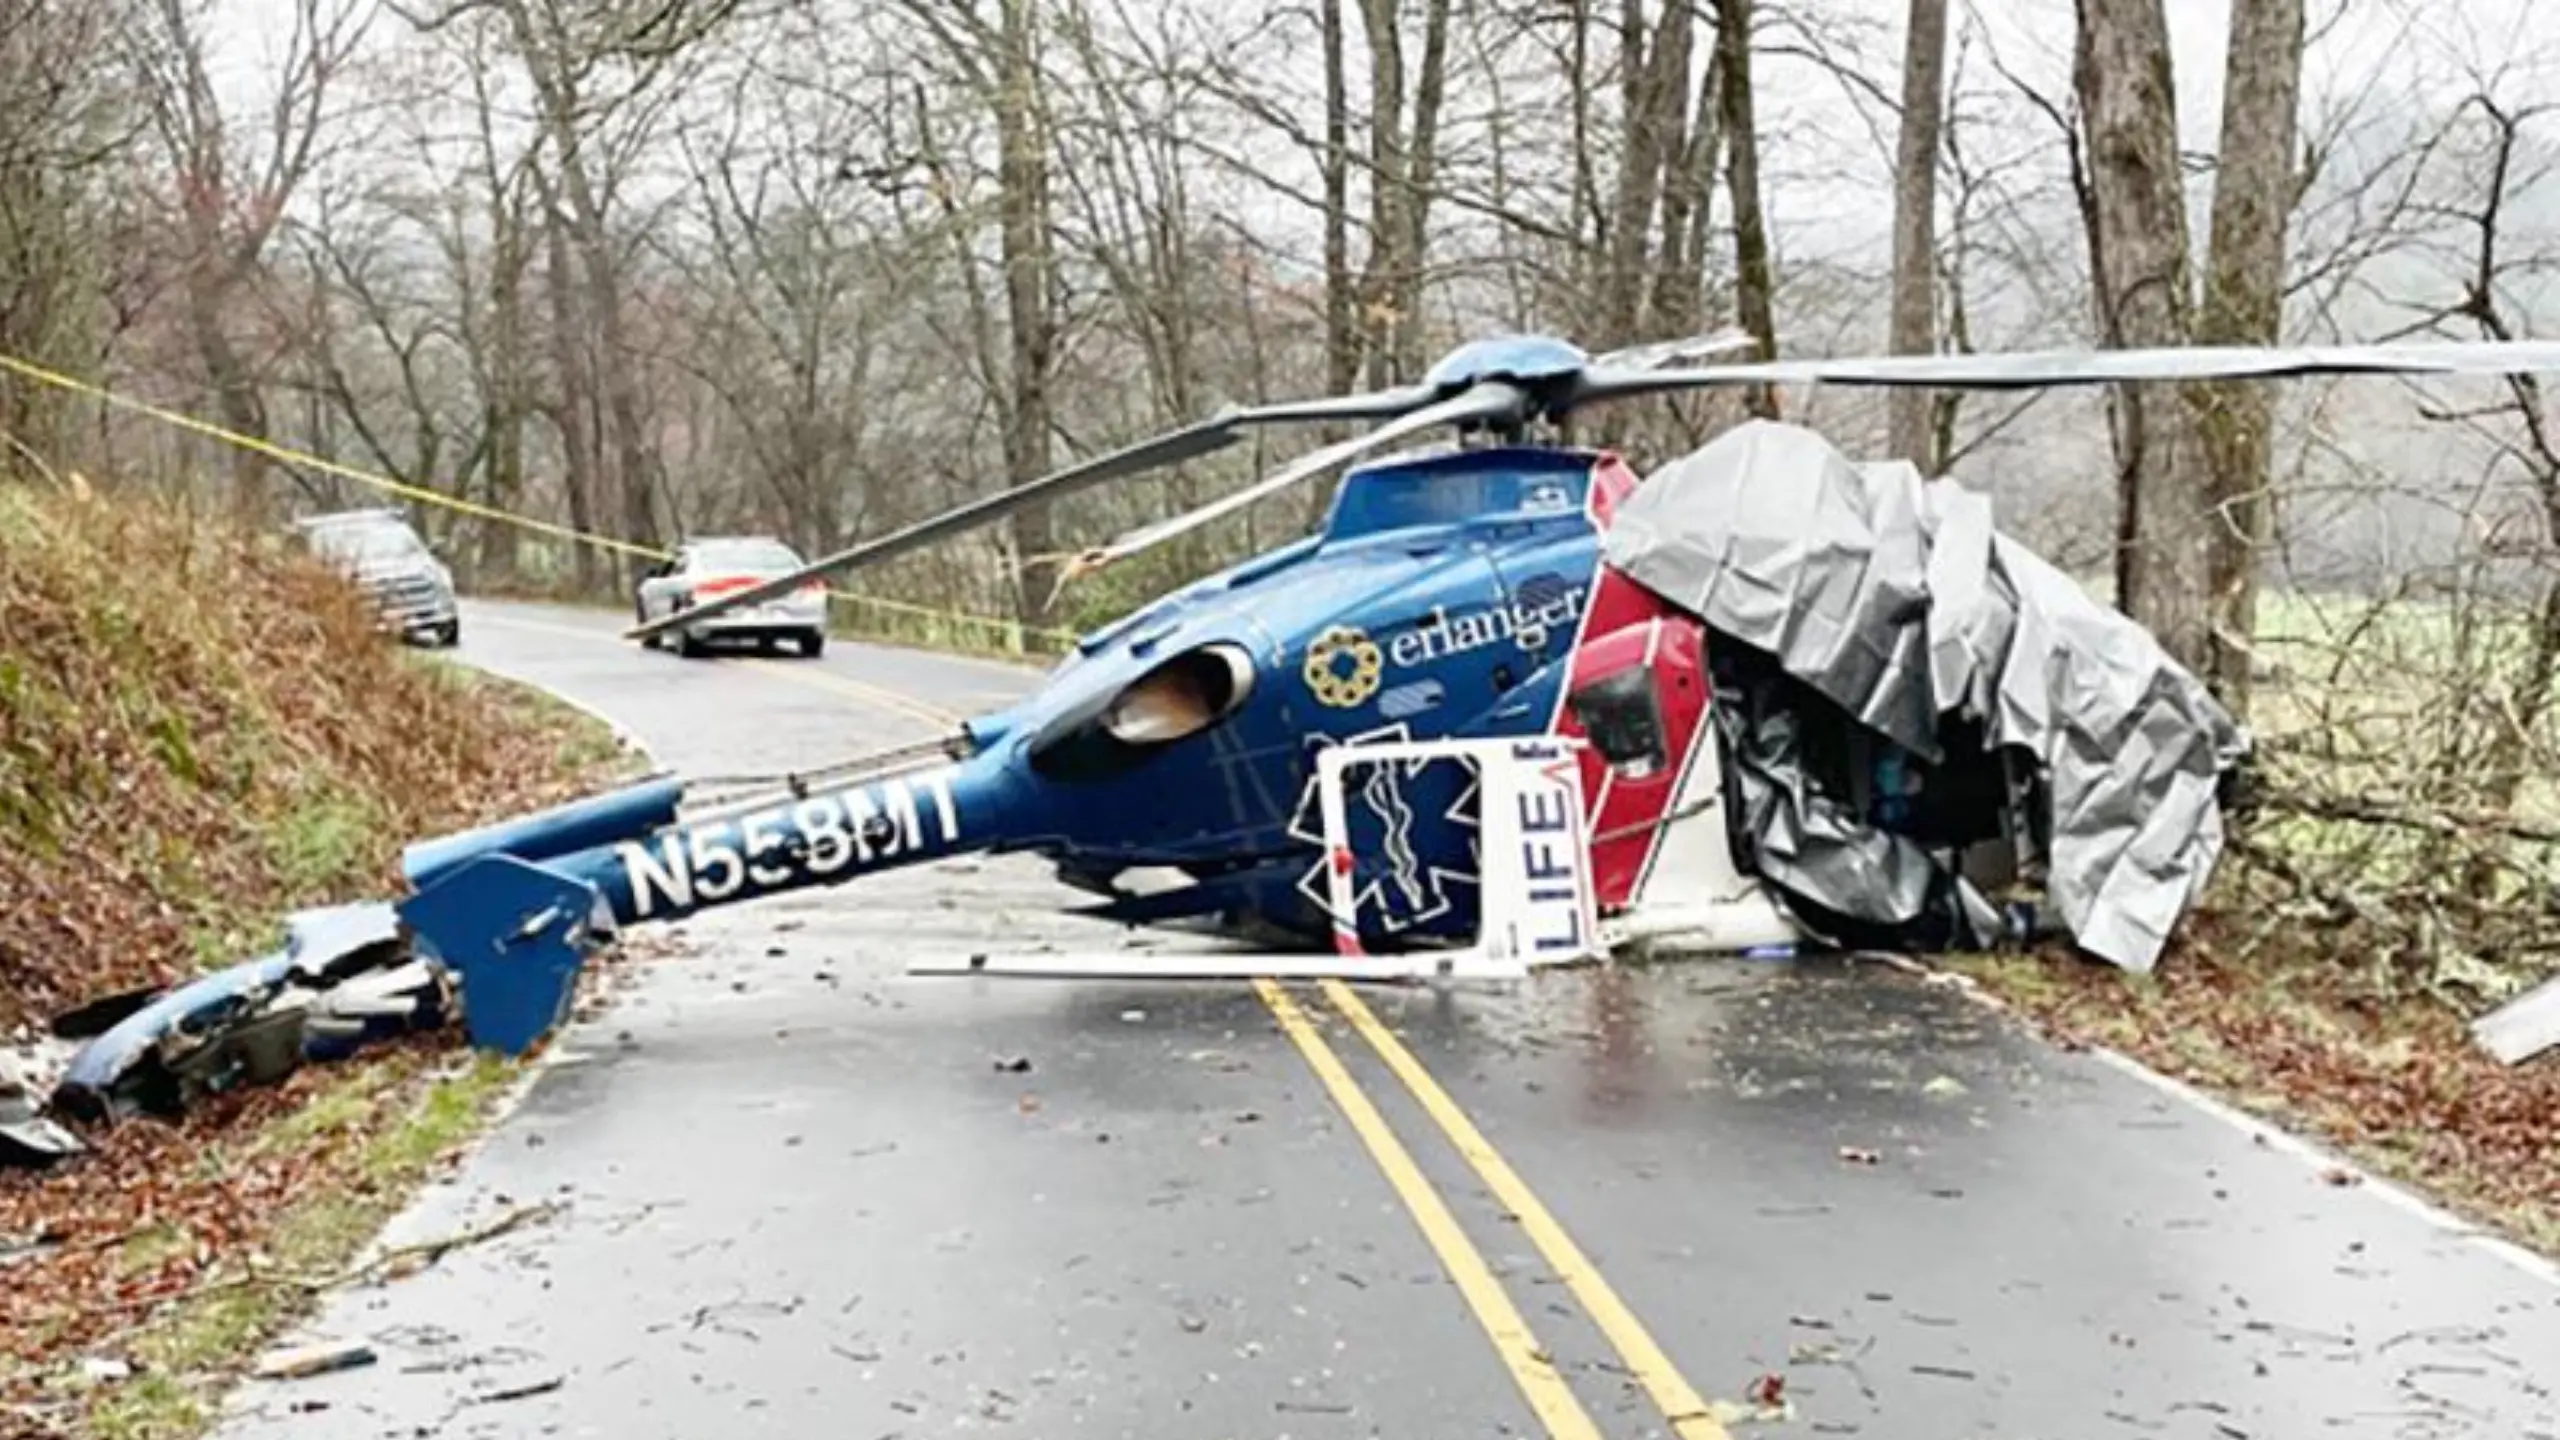 Life Force Helicopter Crashed